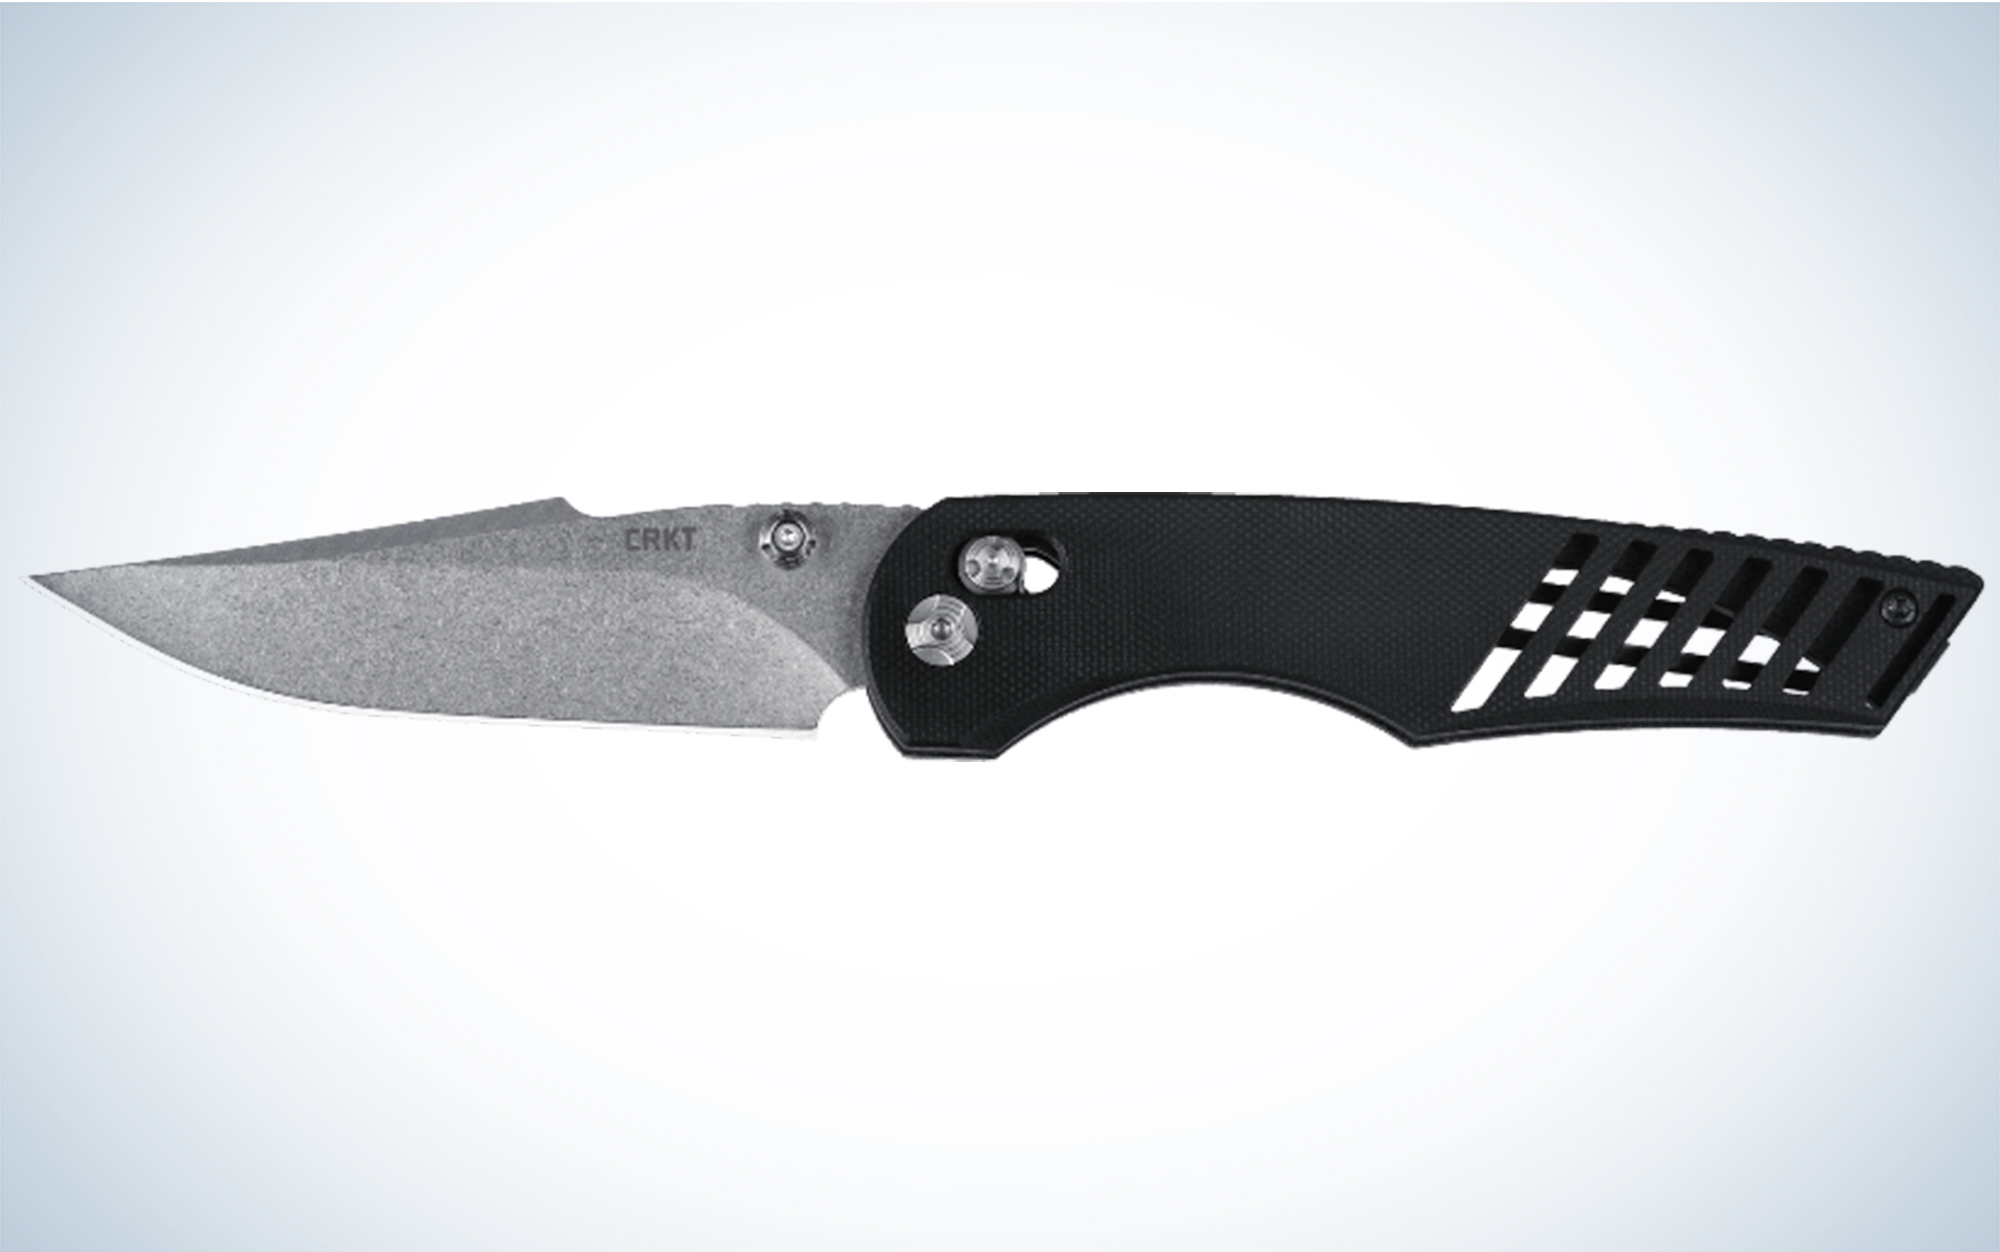 The CRKT Definitive is new at SHOT Show 2023.